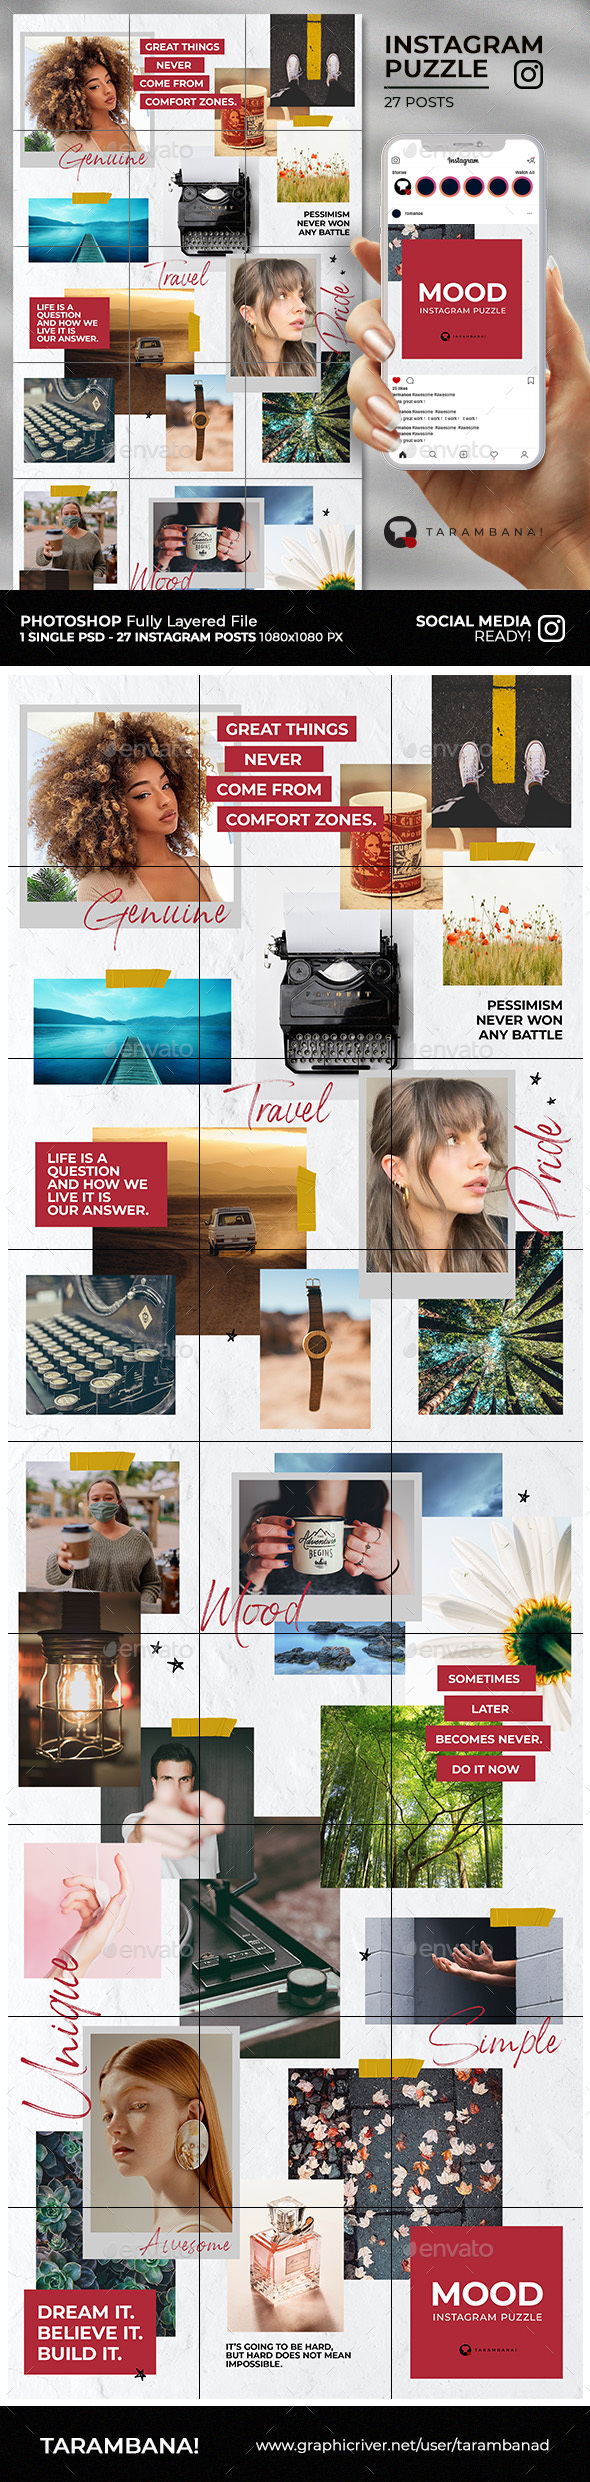 Mood - Instagram Puzzle Feed